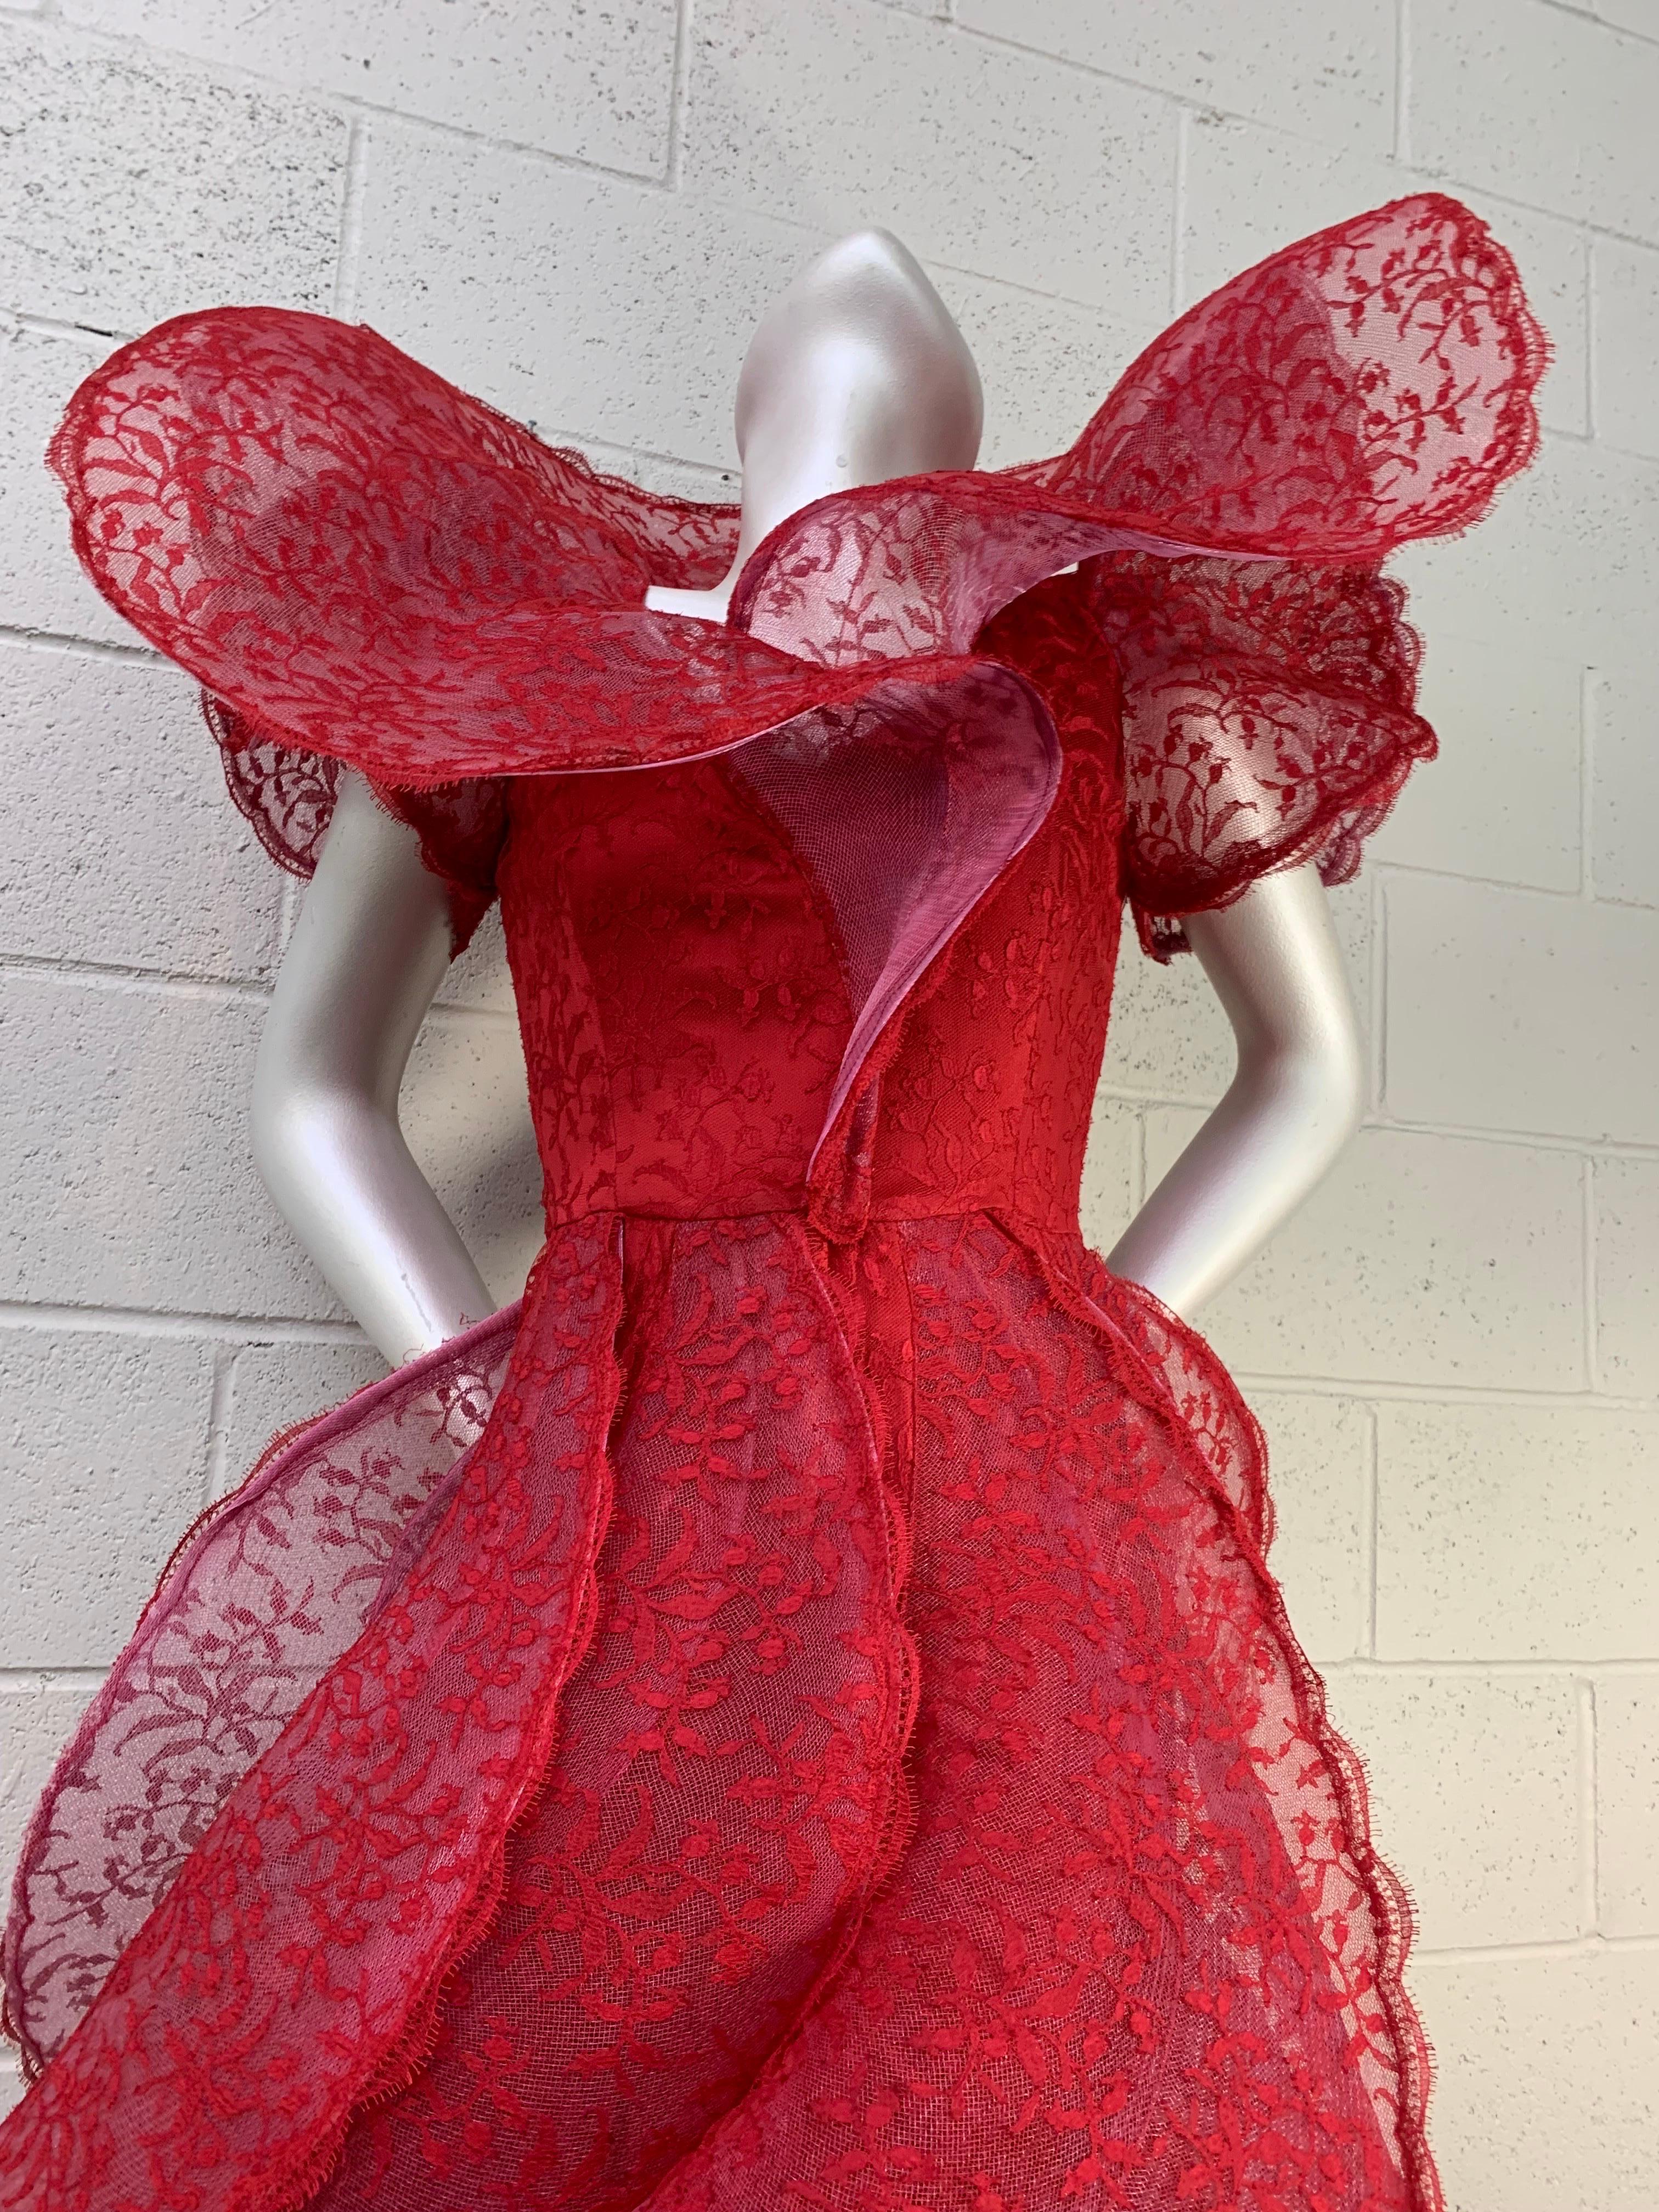 1987 Pierre Cardin Haute Couture Tiered Flounce Lace Dress - Extremely Rare 1